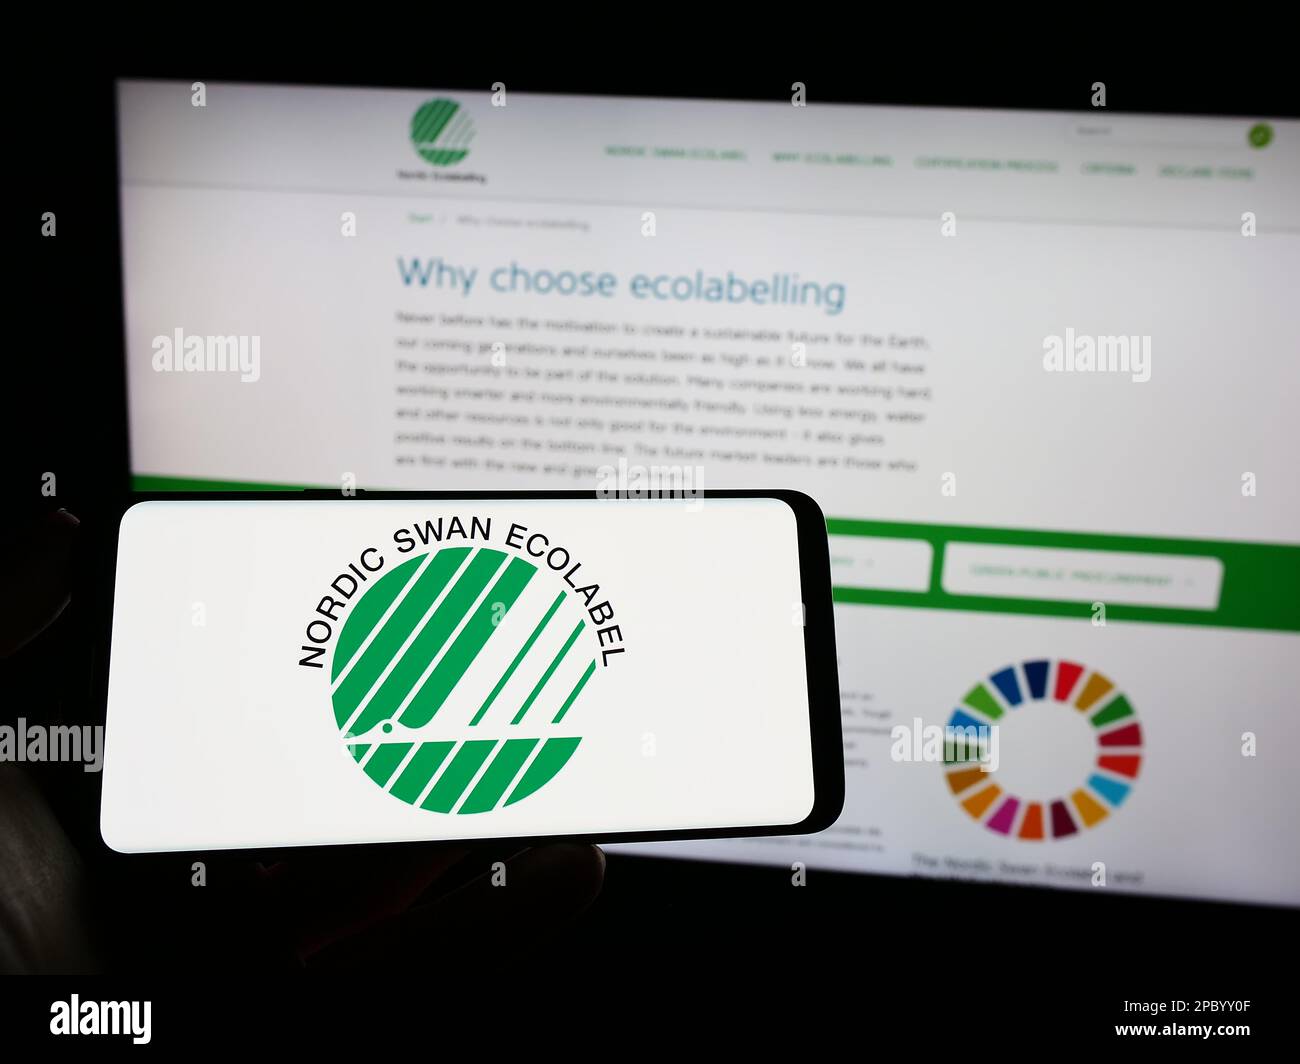 Person holding mobile phone with logo of environmental certification Nordic Ecolabel on screen in front of web page. Focus on phone display. Stock Photo